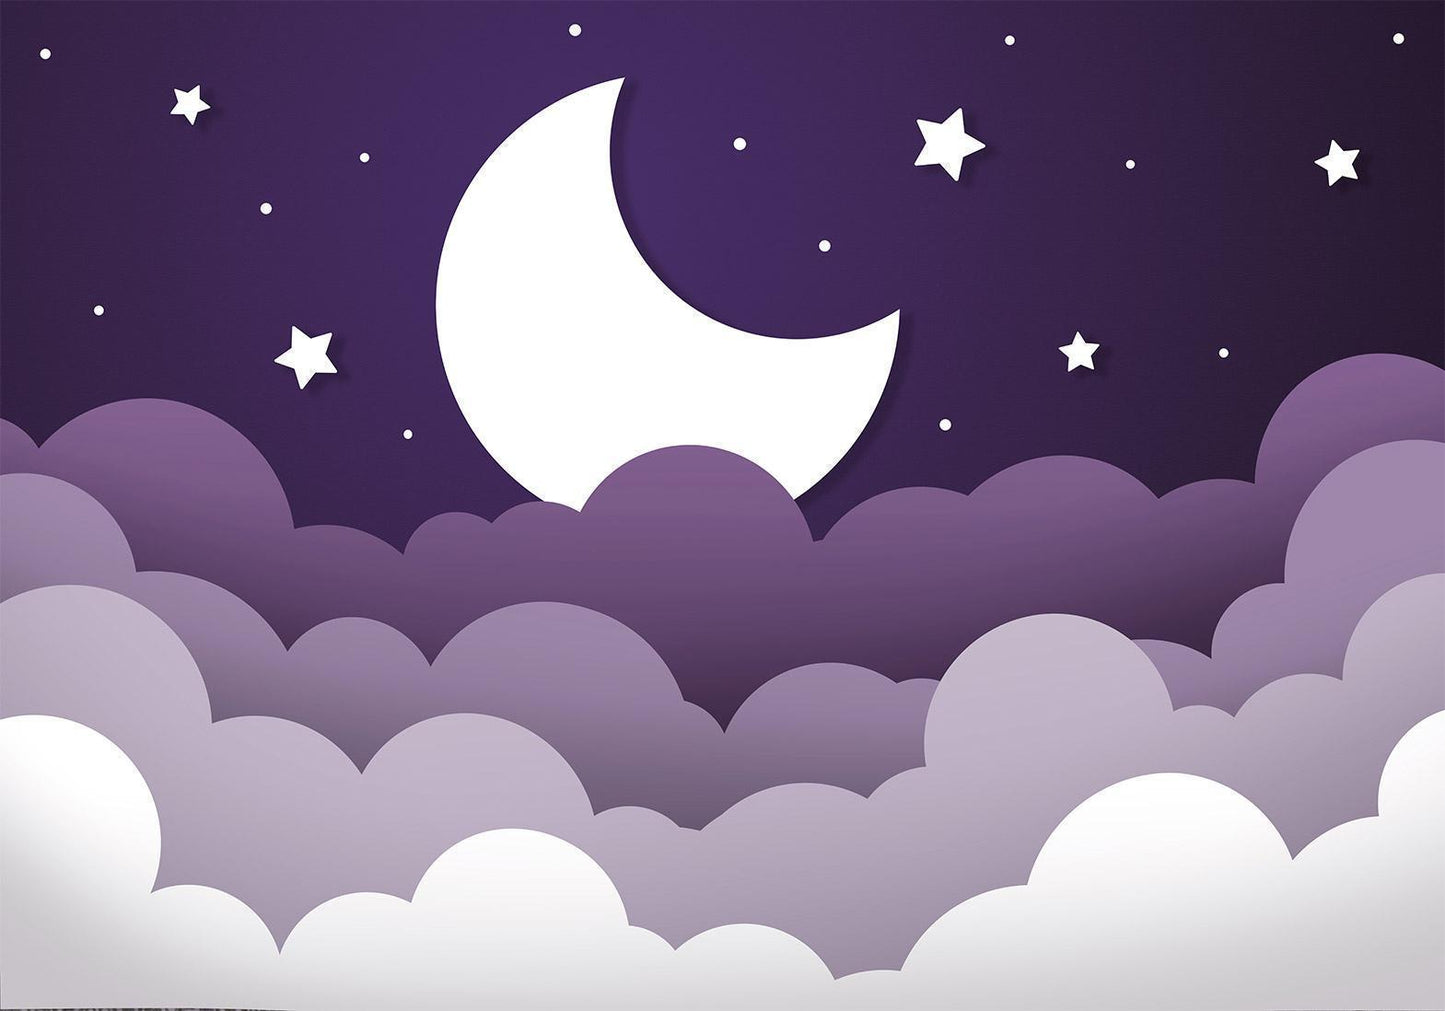 Fotobehang - Moon dream - clouds in a purple sky with stars for children